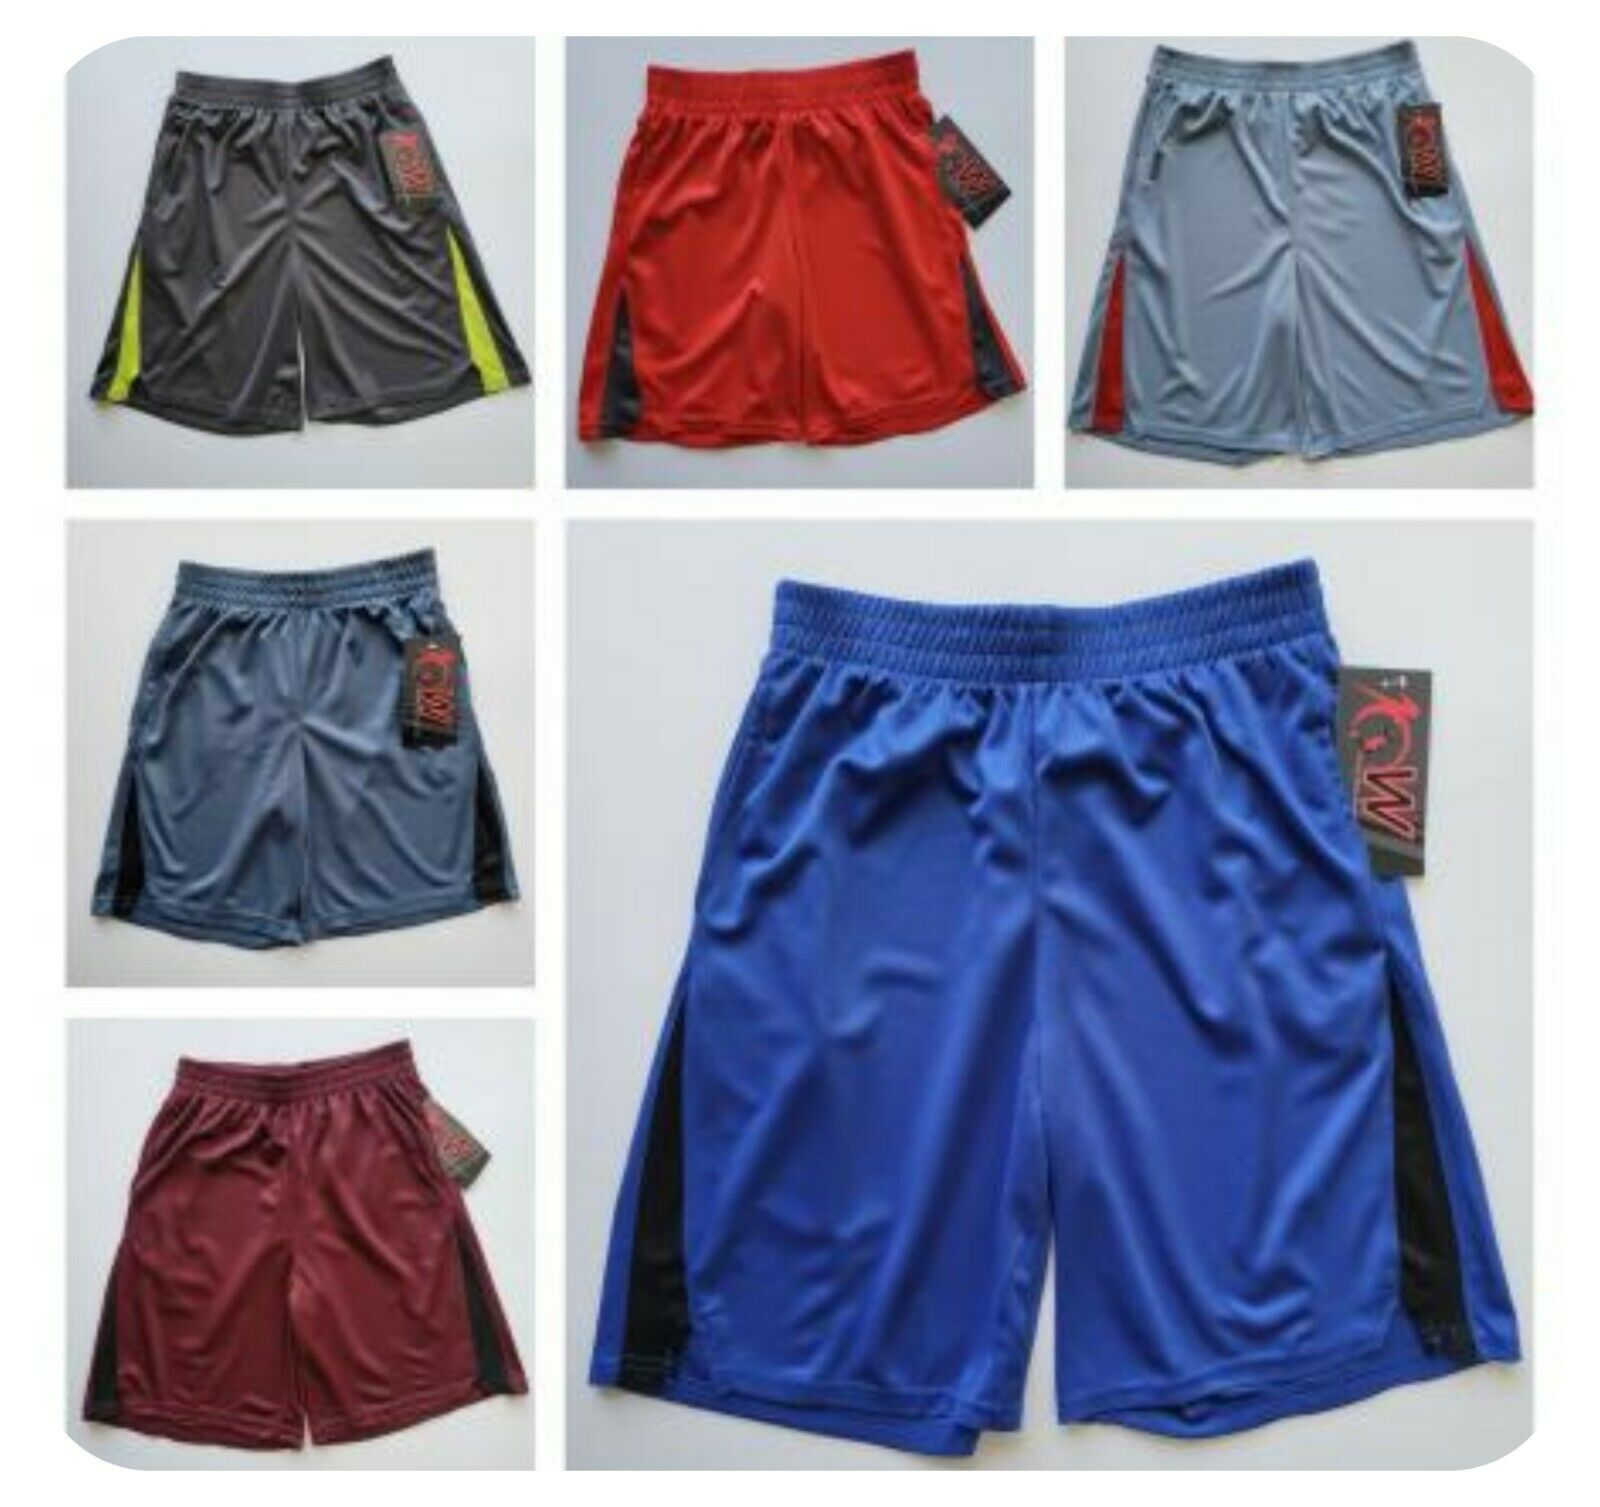 NEW Boys Shorts Sports Basketball Team Outdoors with Side Pockets